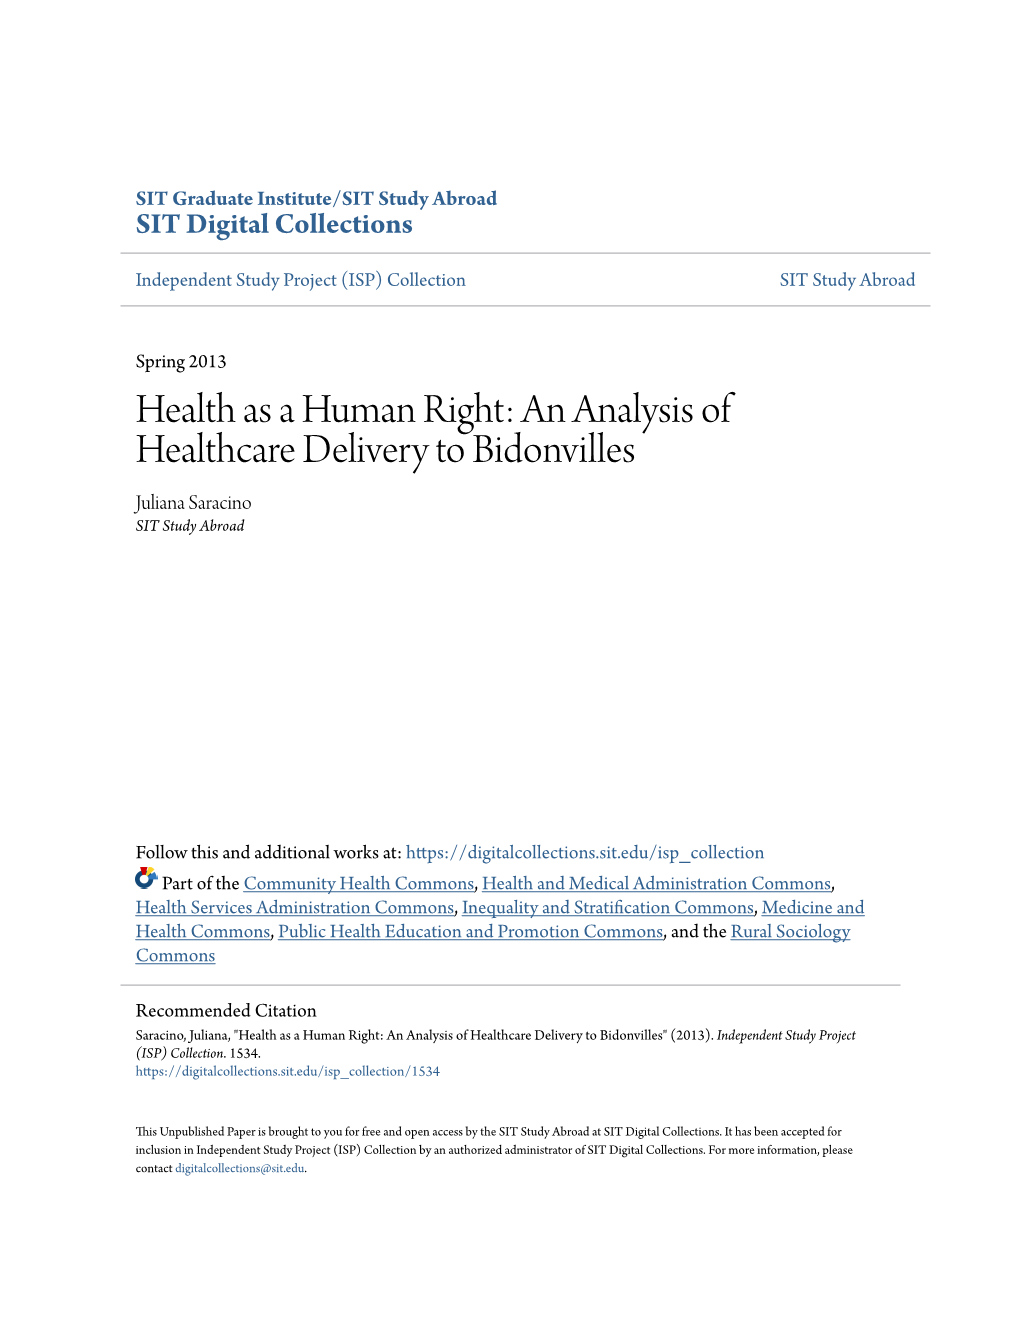 Health As a Human Right: an Analysis of Healthcare Delivery to Bidonvilles Juliana Saracino SIT Study Abroad